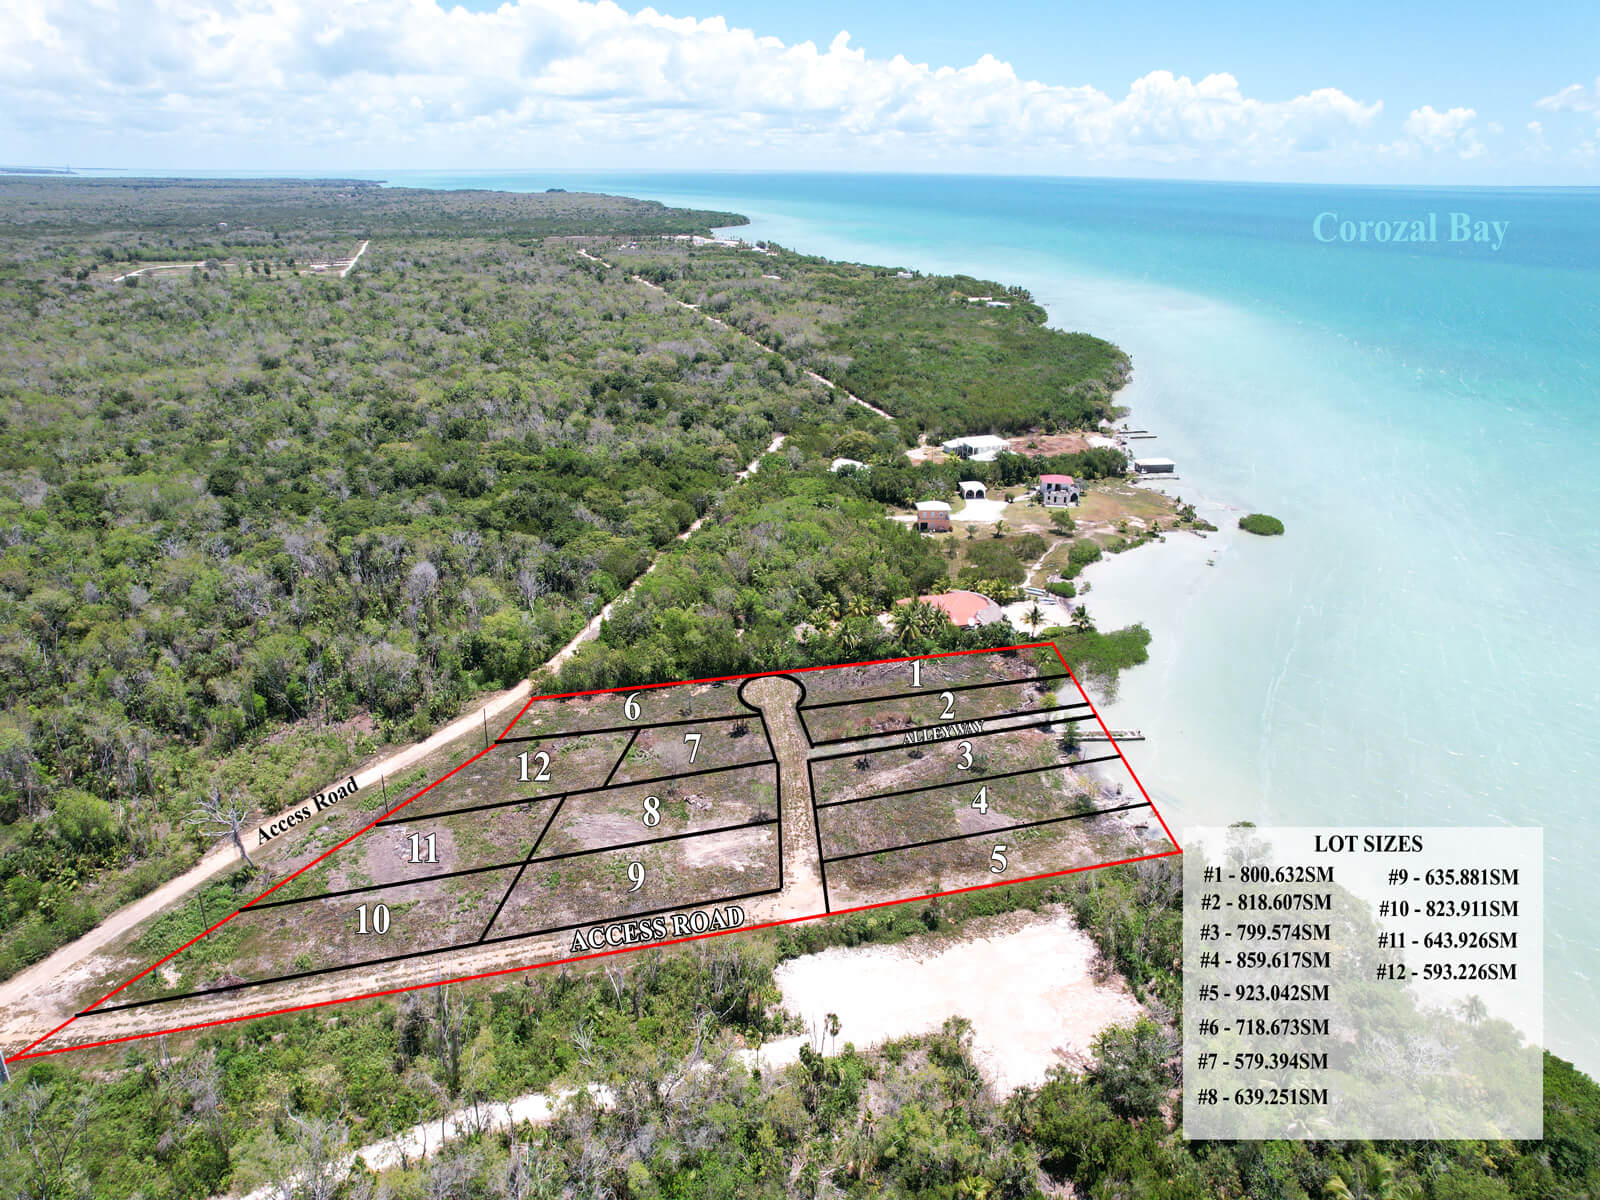 Beautiful Bayfront and Bayview large lots for your dream home in the tropics